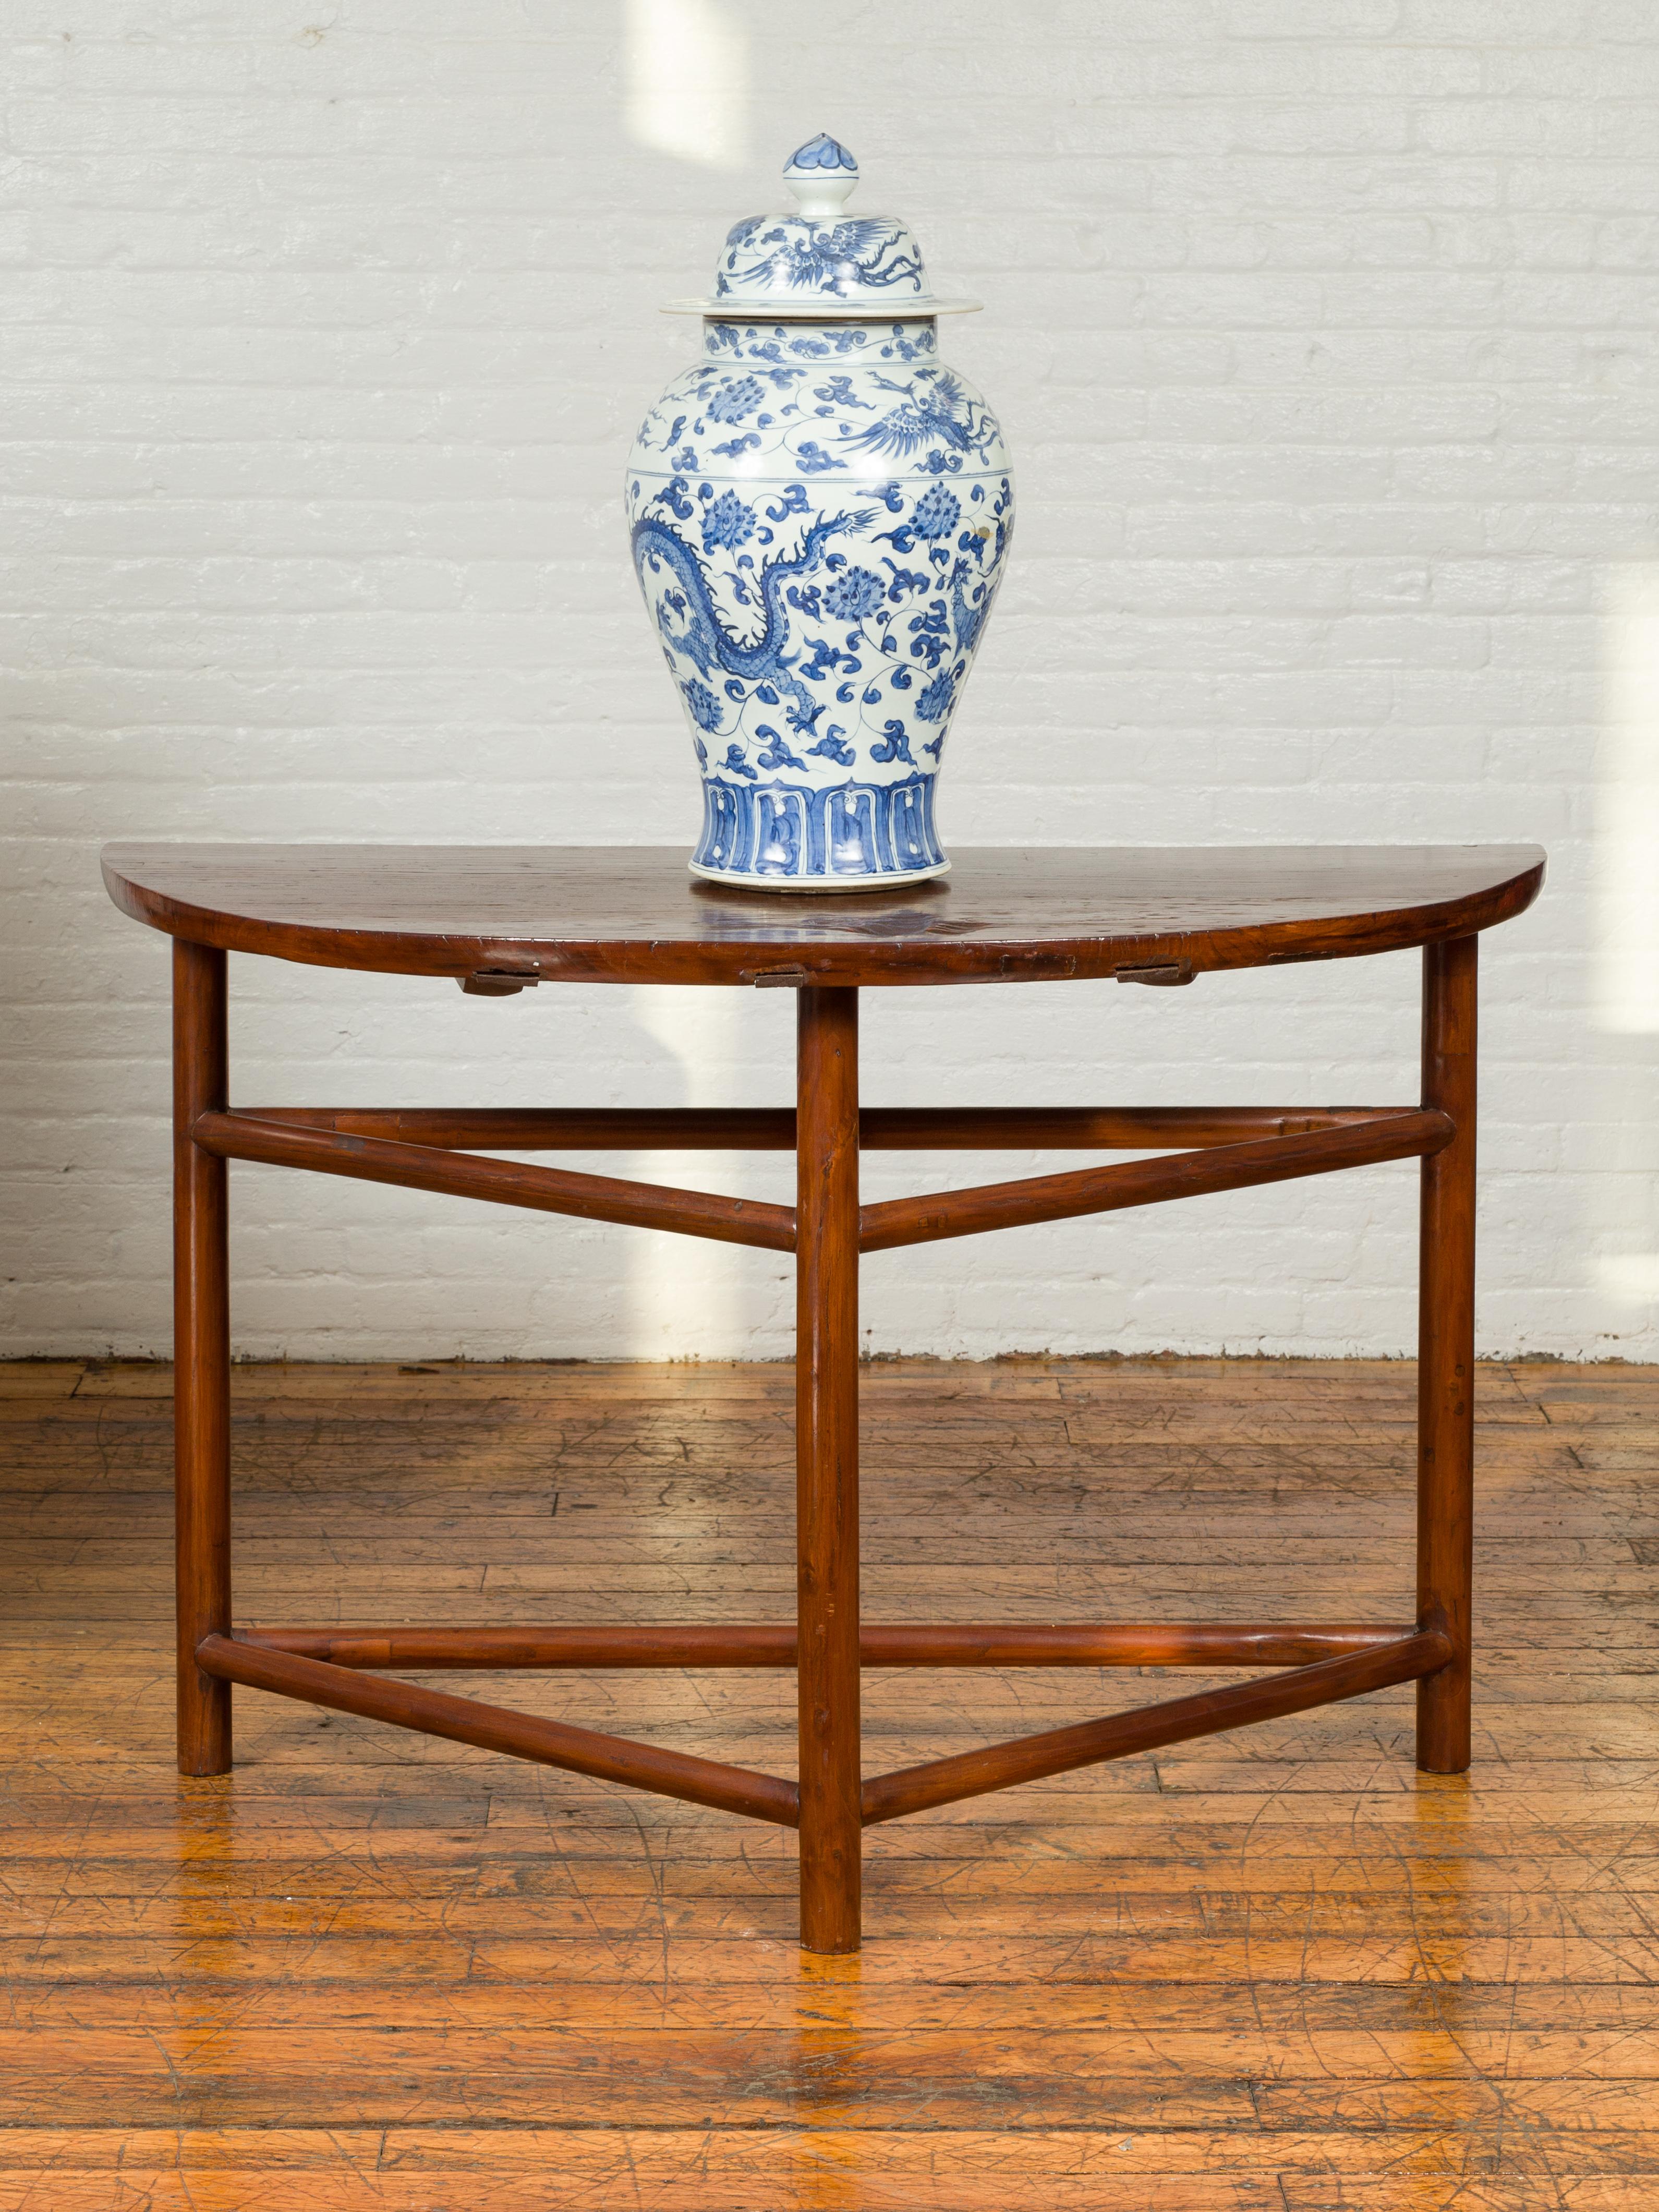 20th Century Pair of Vintage Chinese Demilune Console Tables with Semi-Circular Tops